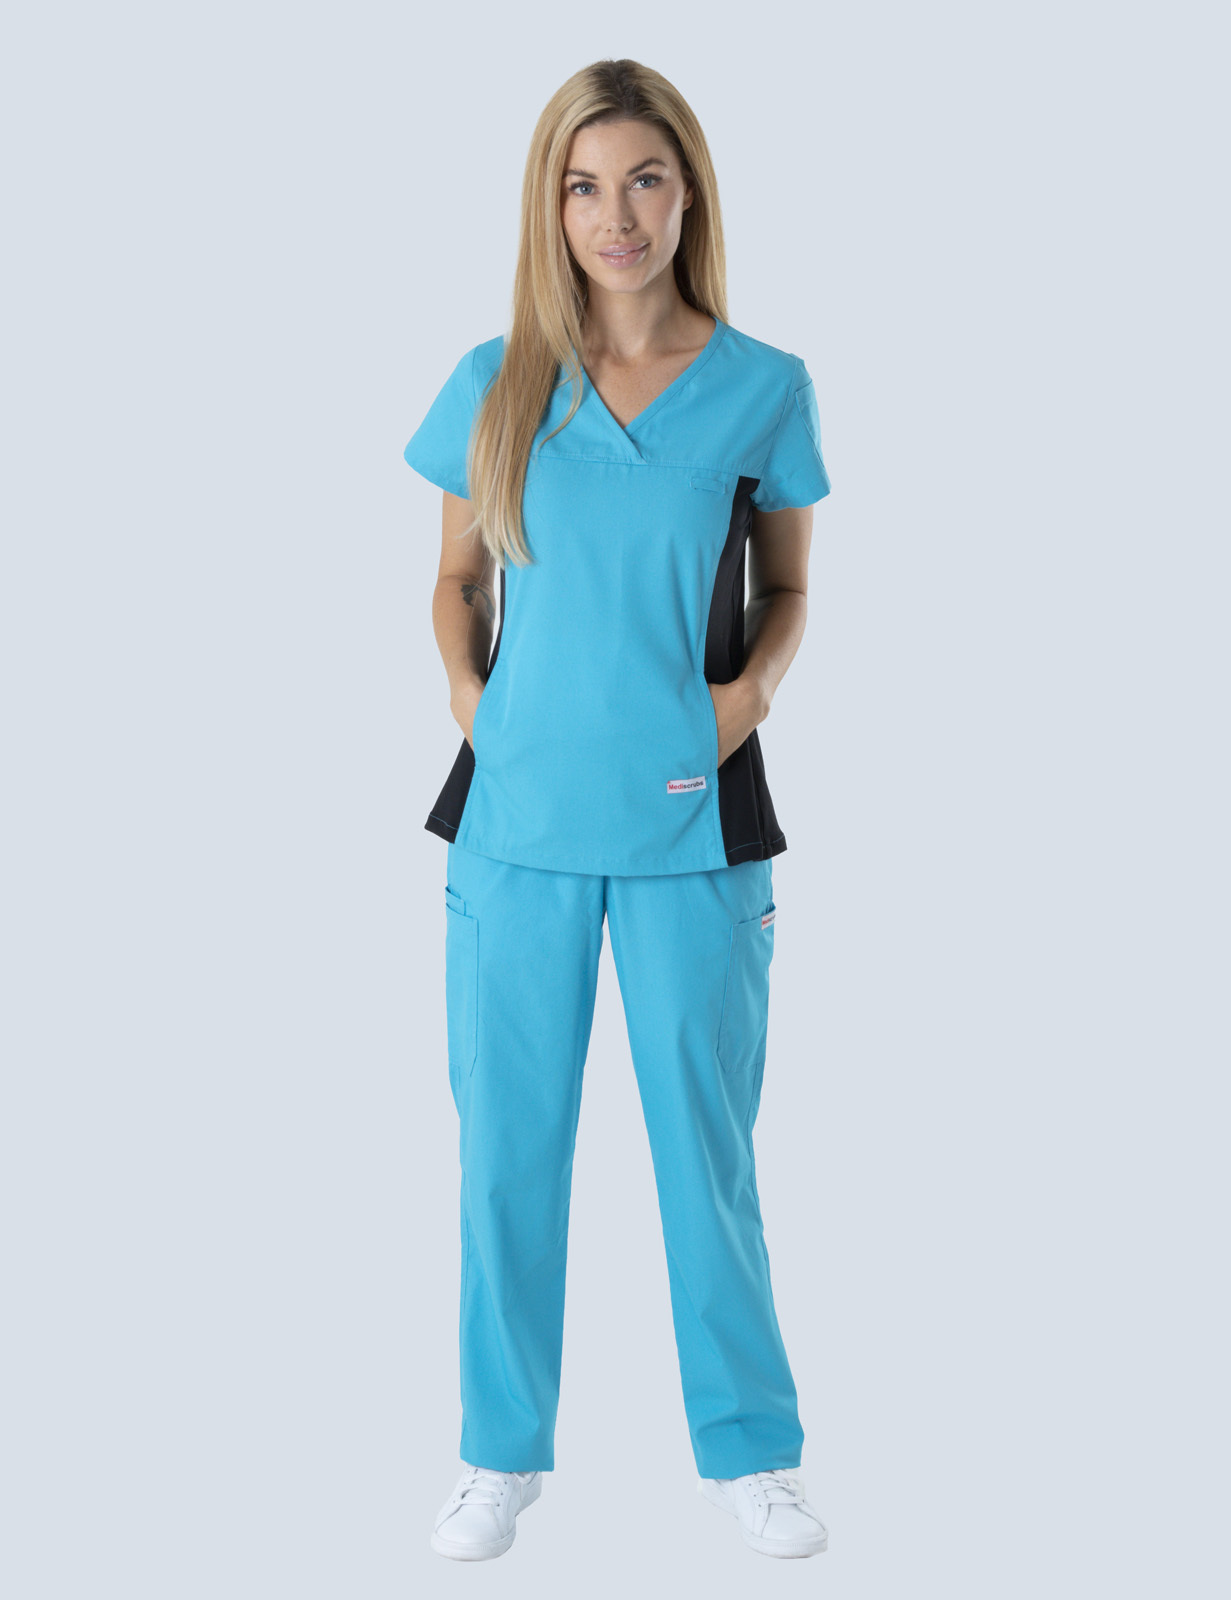 Women's Fit Solid Scrub Top With Spandex Panel - Aqua - 5X Large